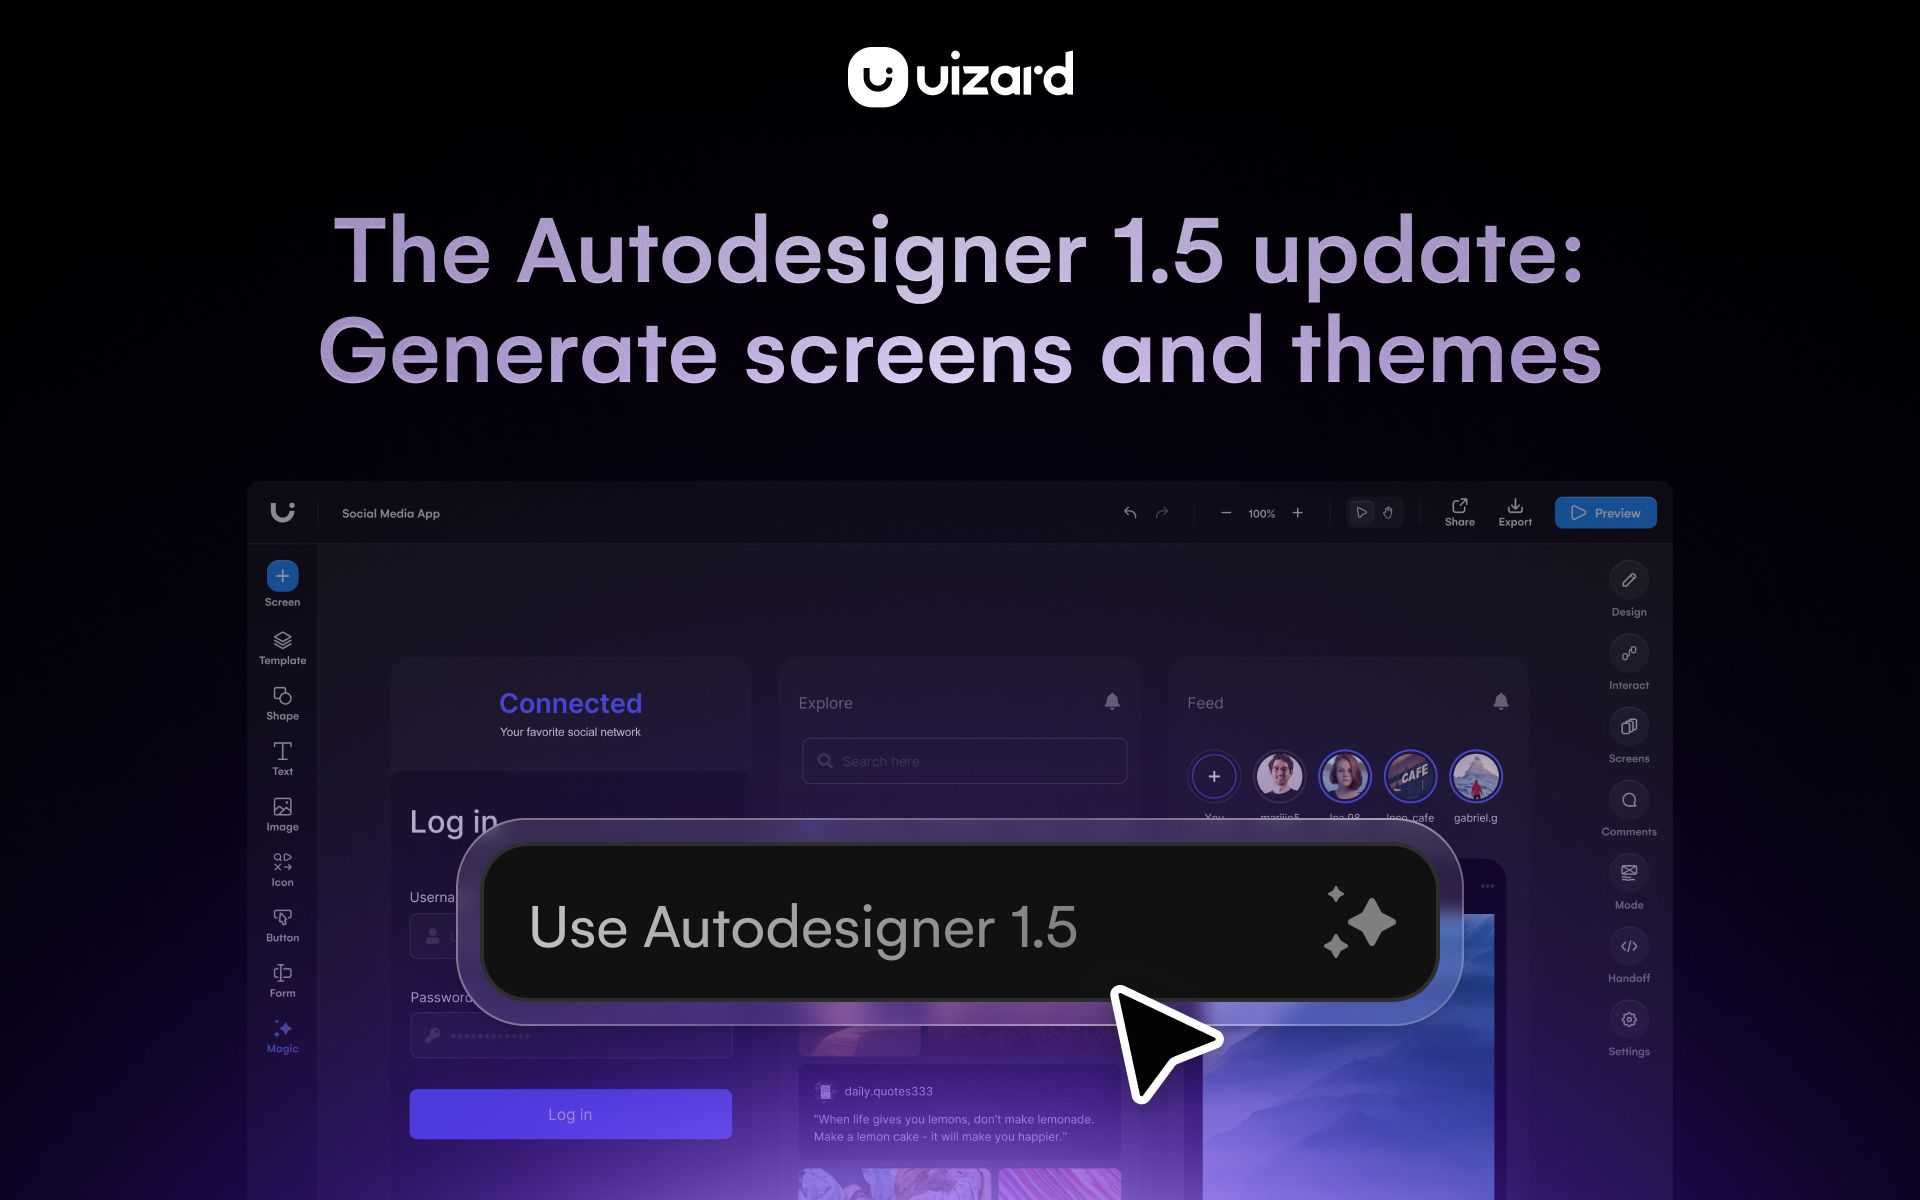 Blog post about the uizard 1.5 update